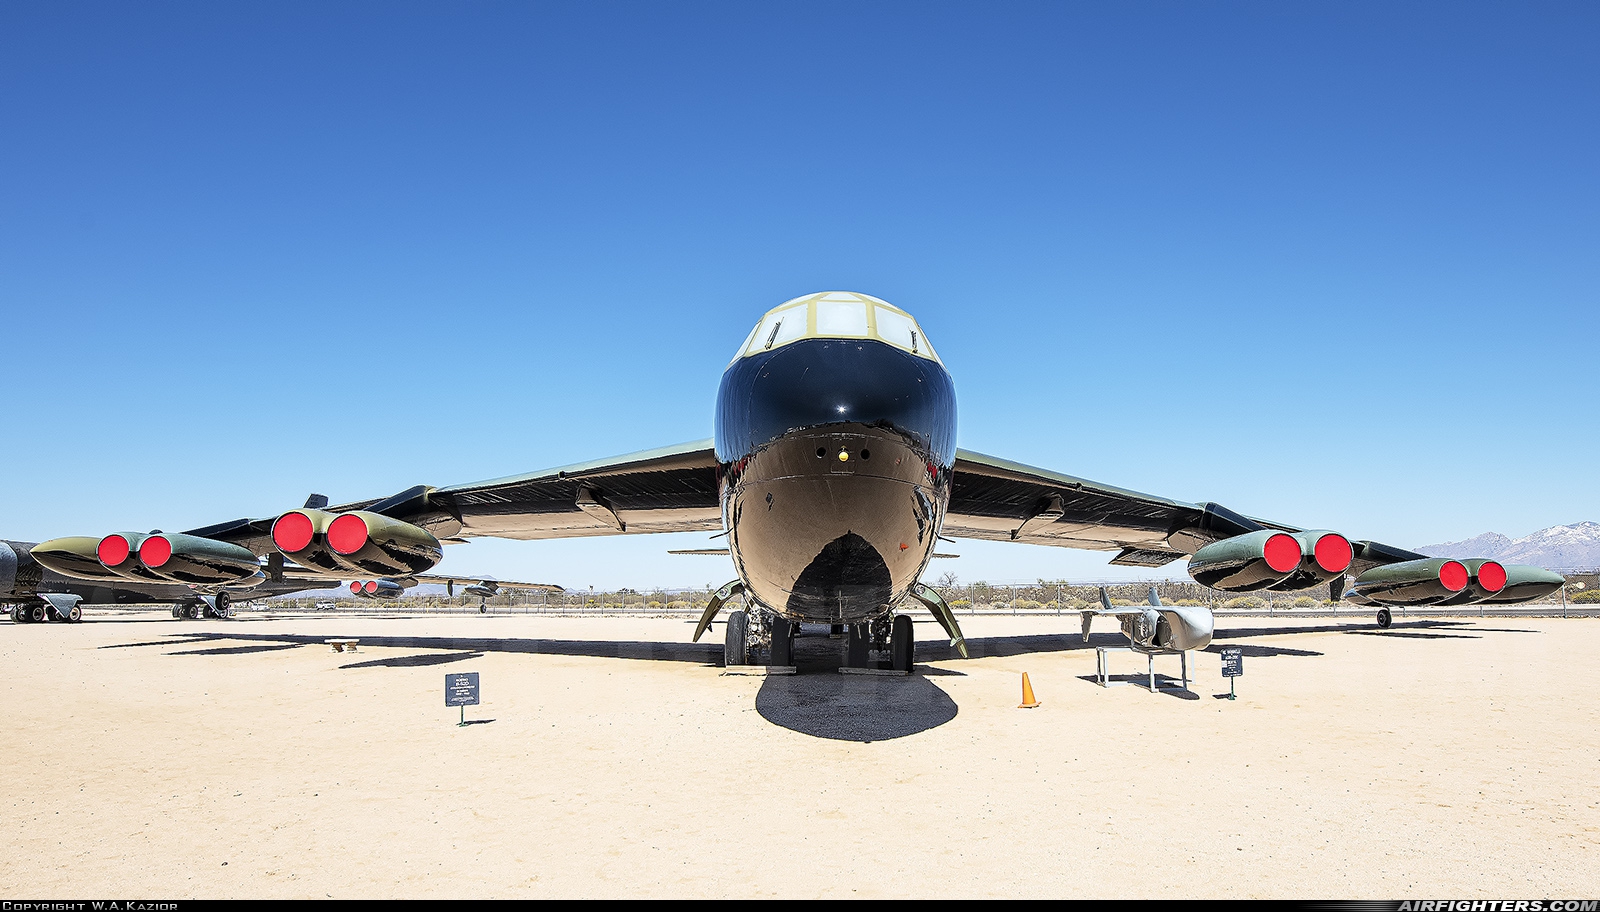 USA - Air Force Boeing B-52D Stratofortress 55-0067 at Tucson - Pima Air and Space Museum, USA